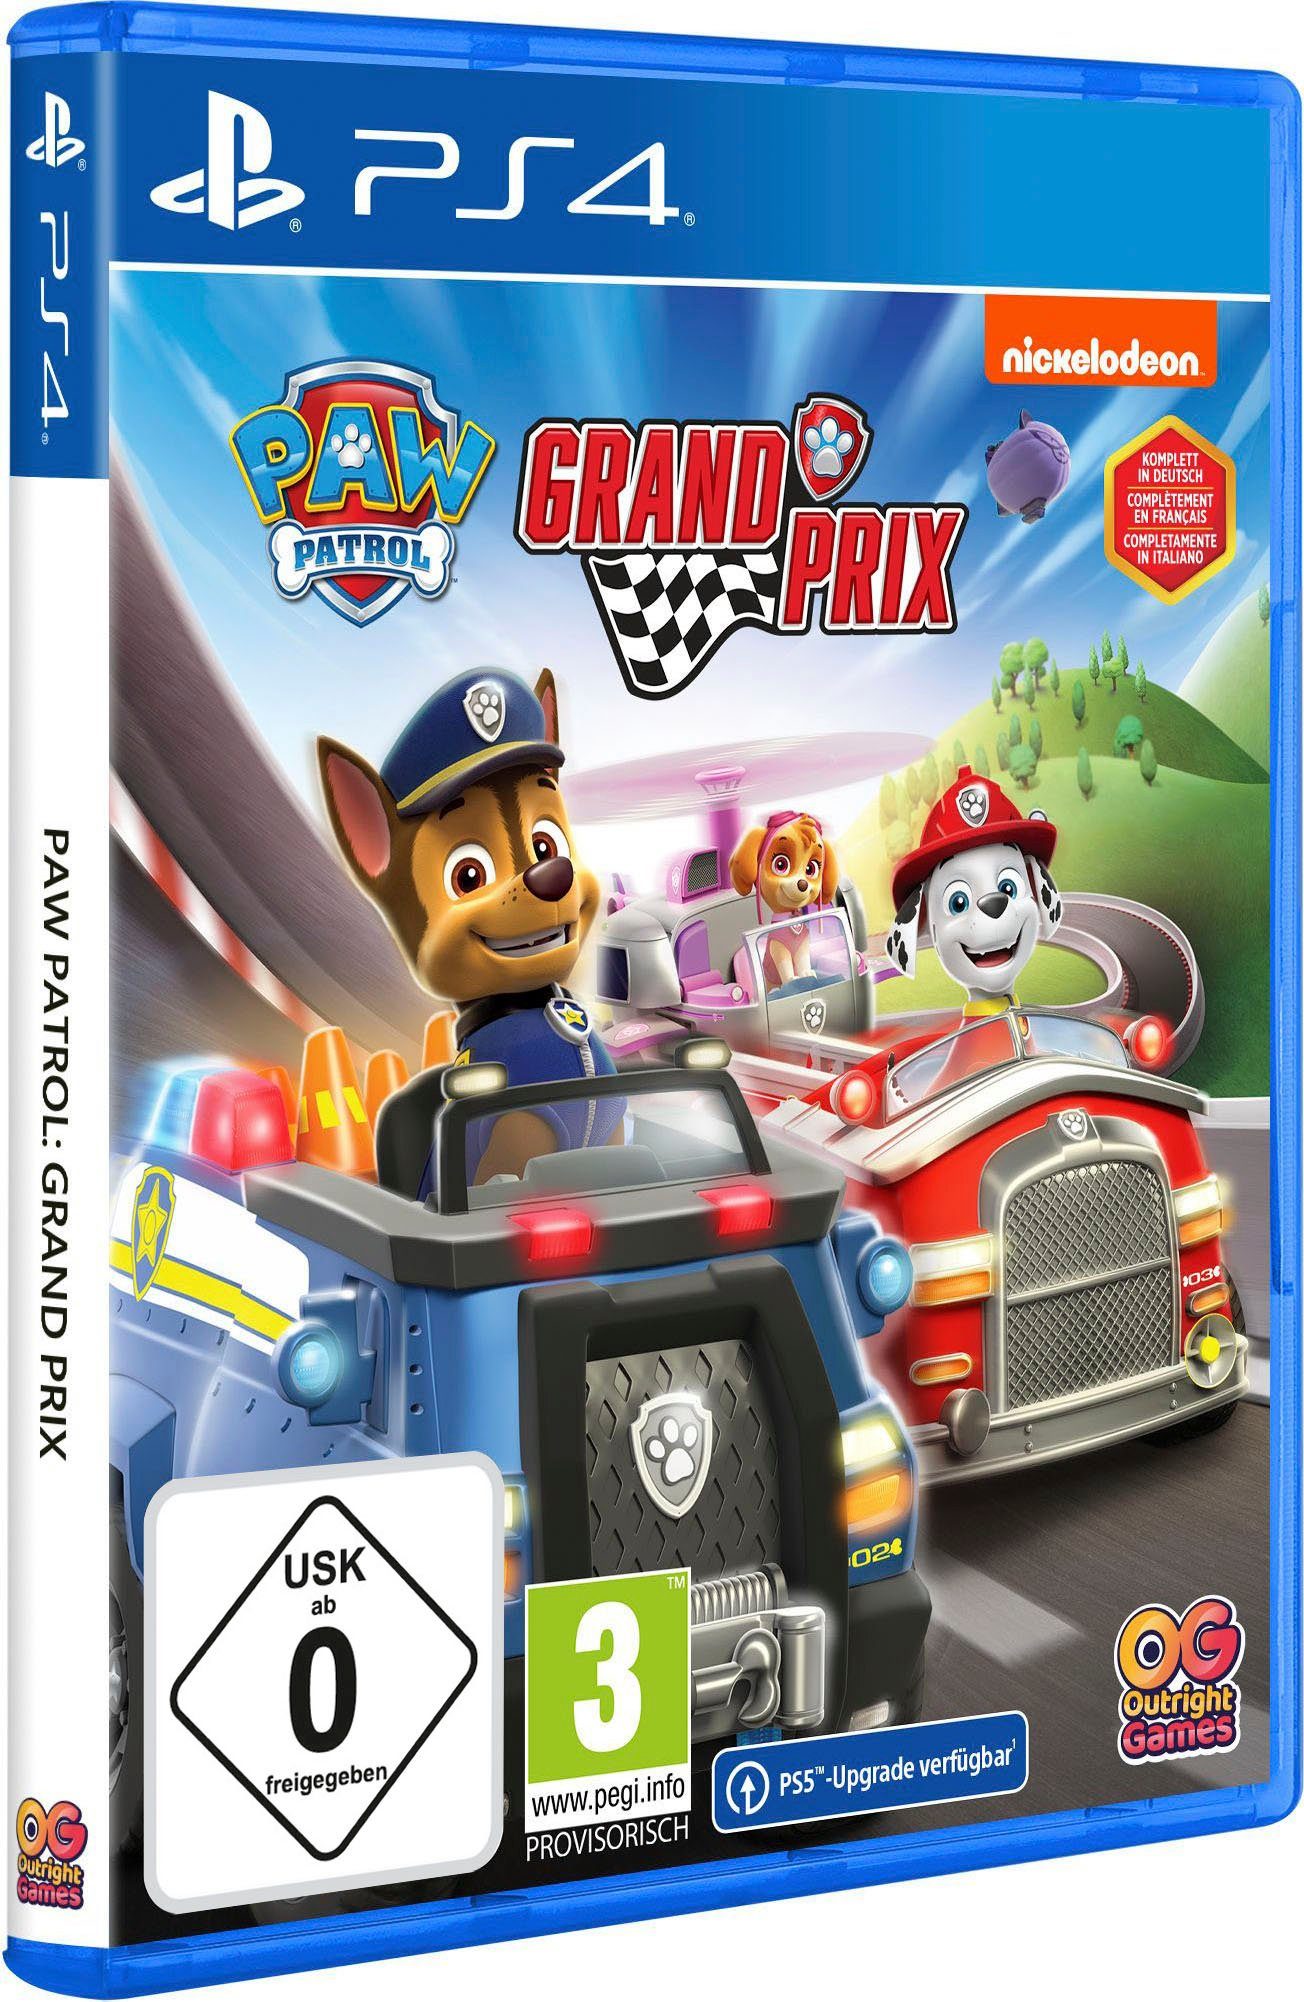 4 Grand Games Outright PlayStation Prix Patrol: Paw